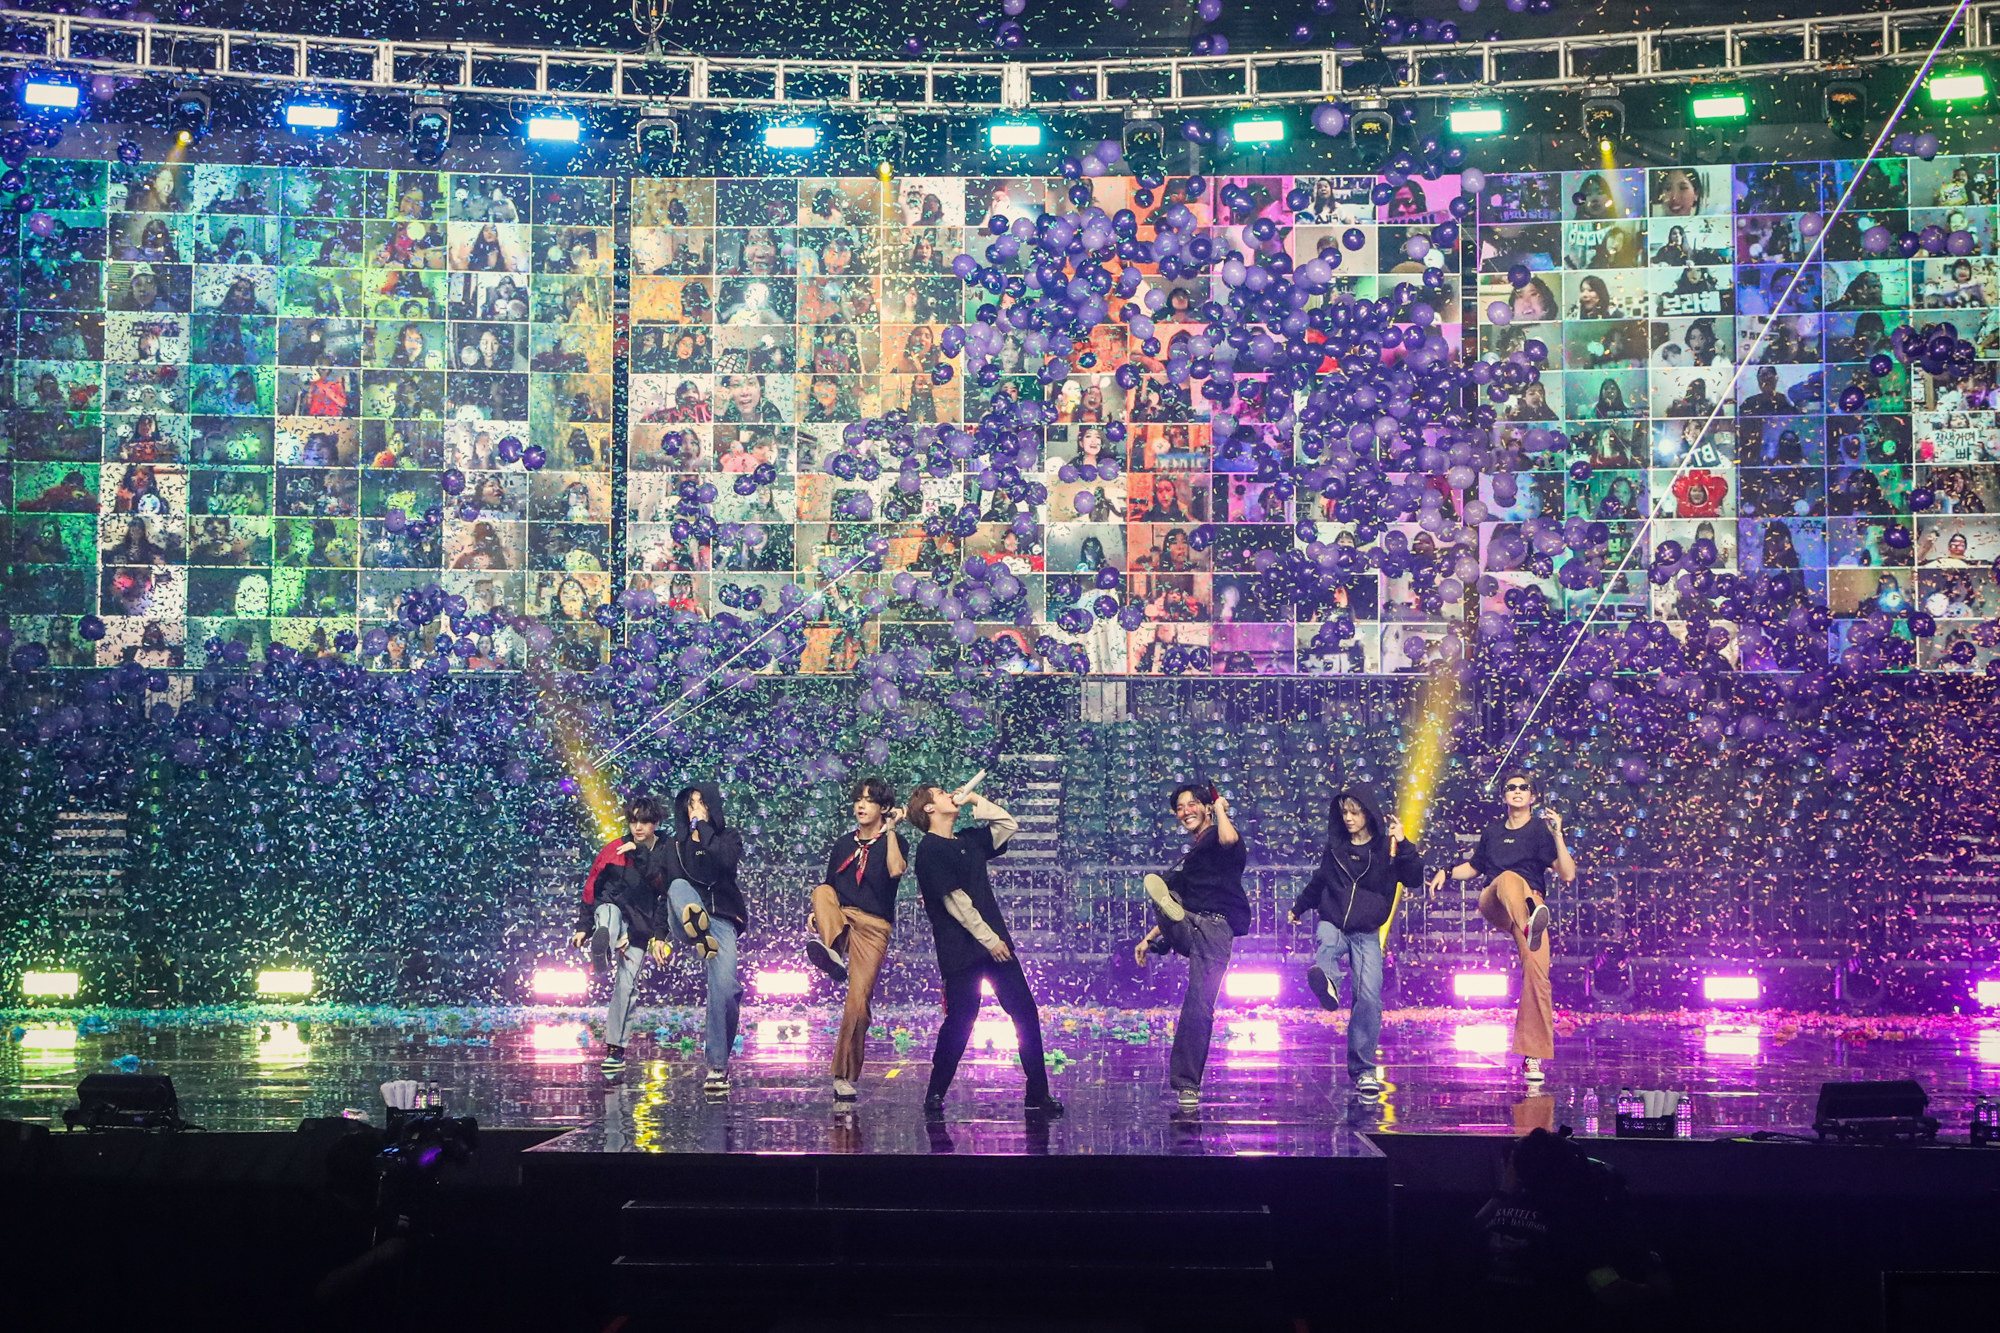 BTS's Virtual Concerts Connected People On A Global Scale Not Seen Before The Pandemic